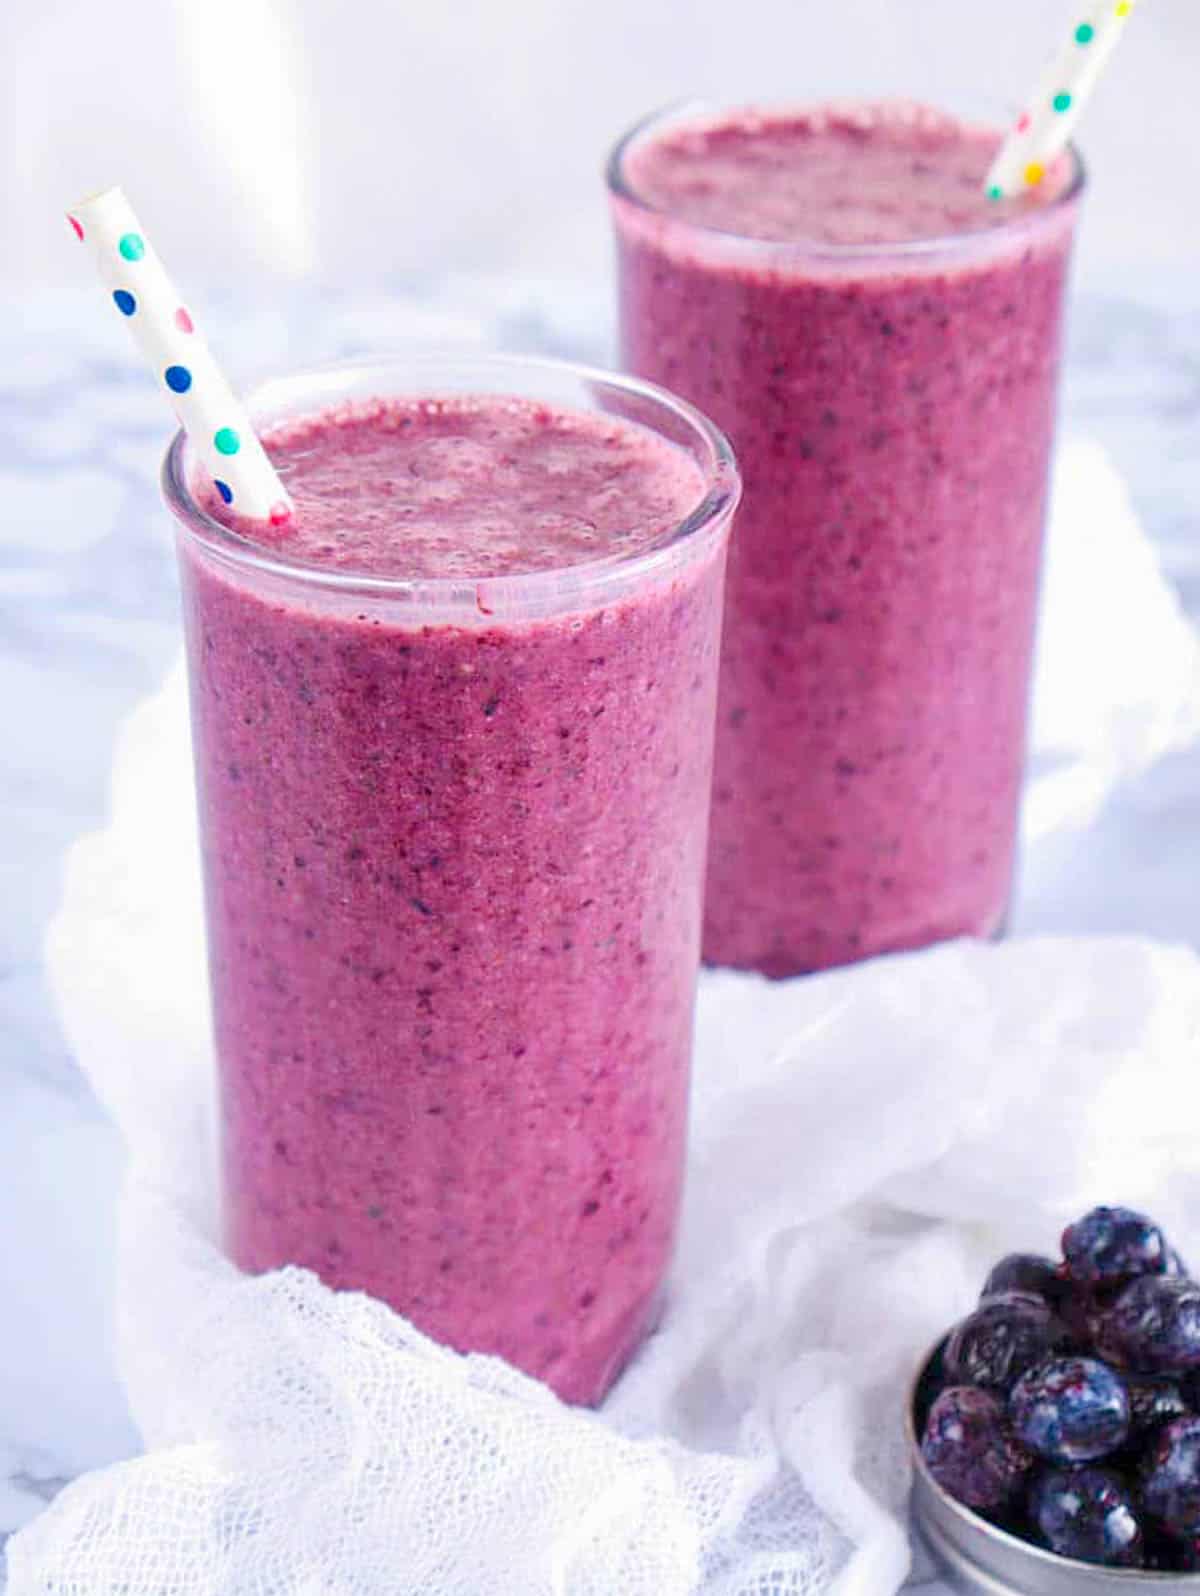 Blueberry pineapple smoothie in two gl،es with a straw a،nst a grey background.